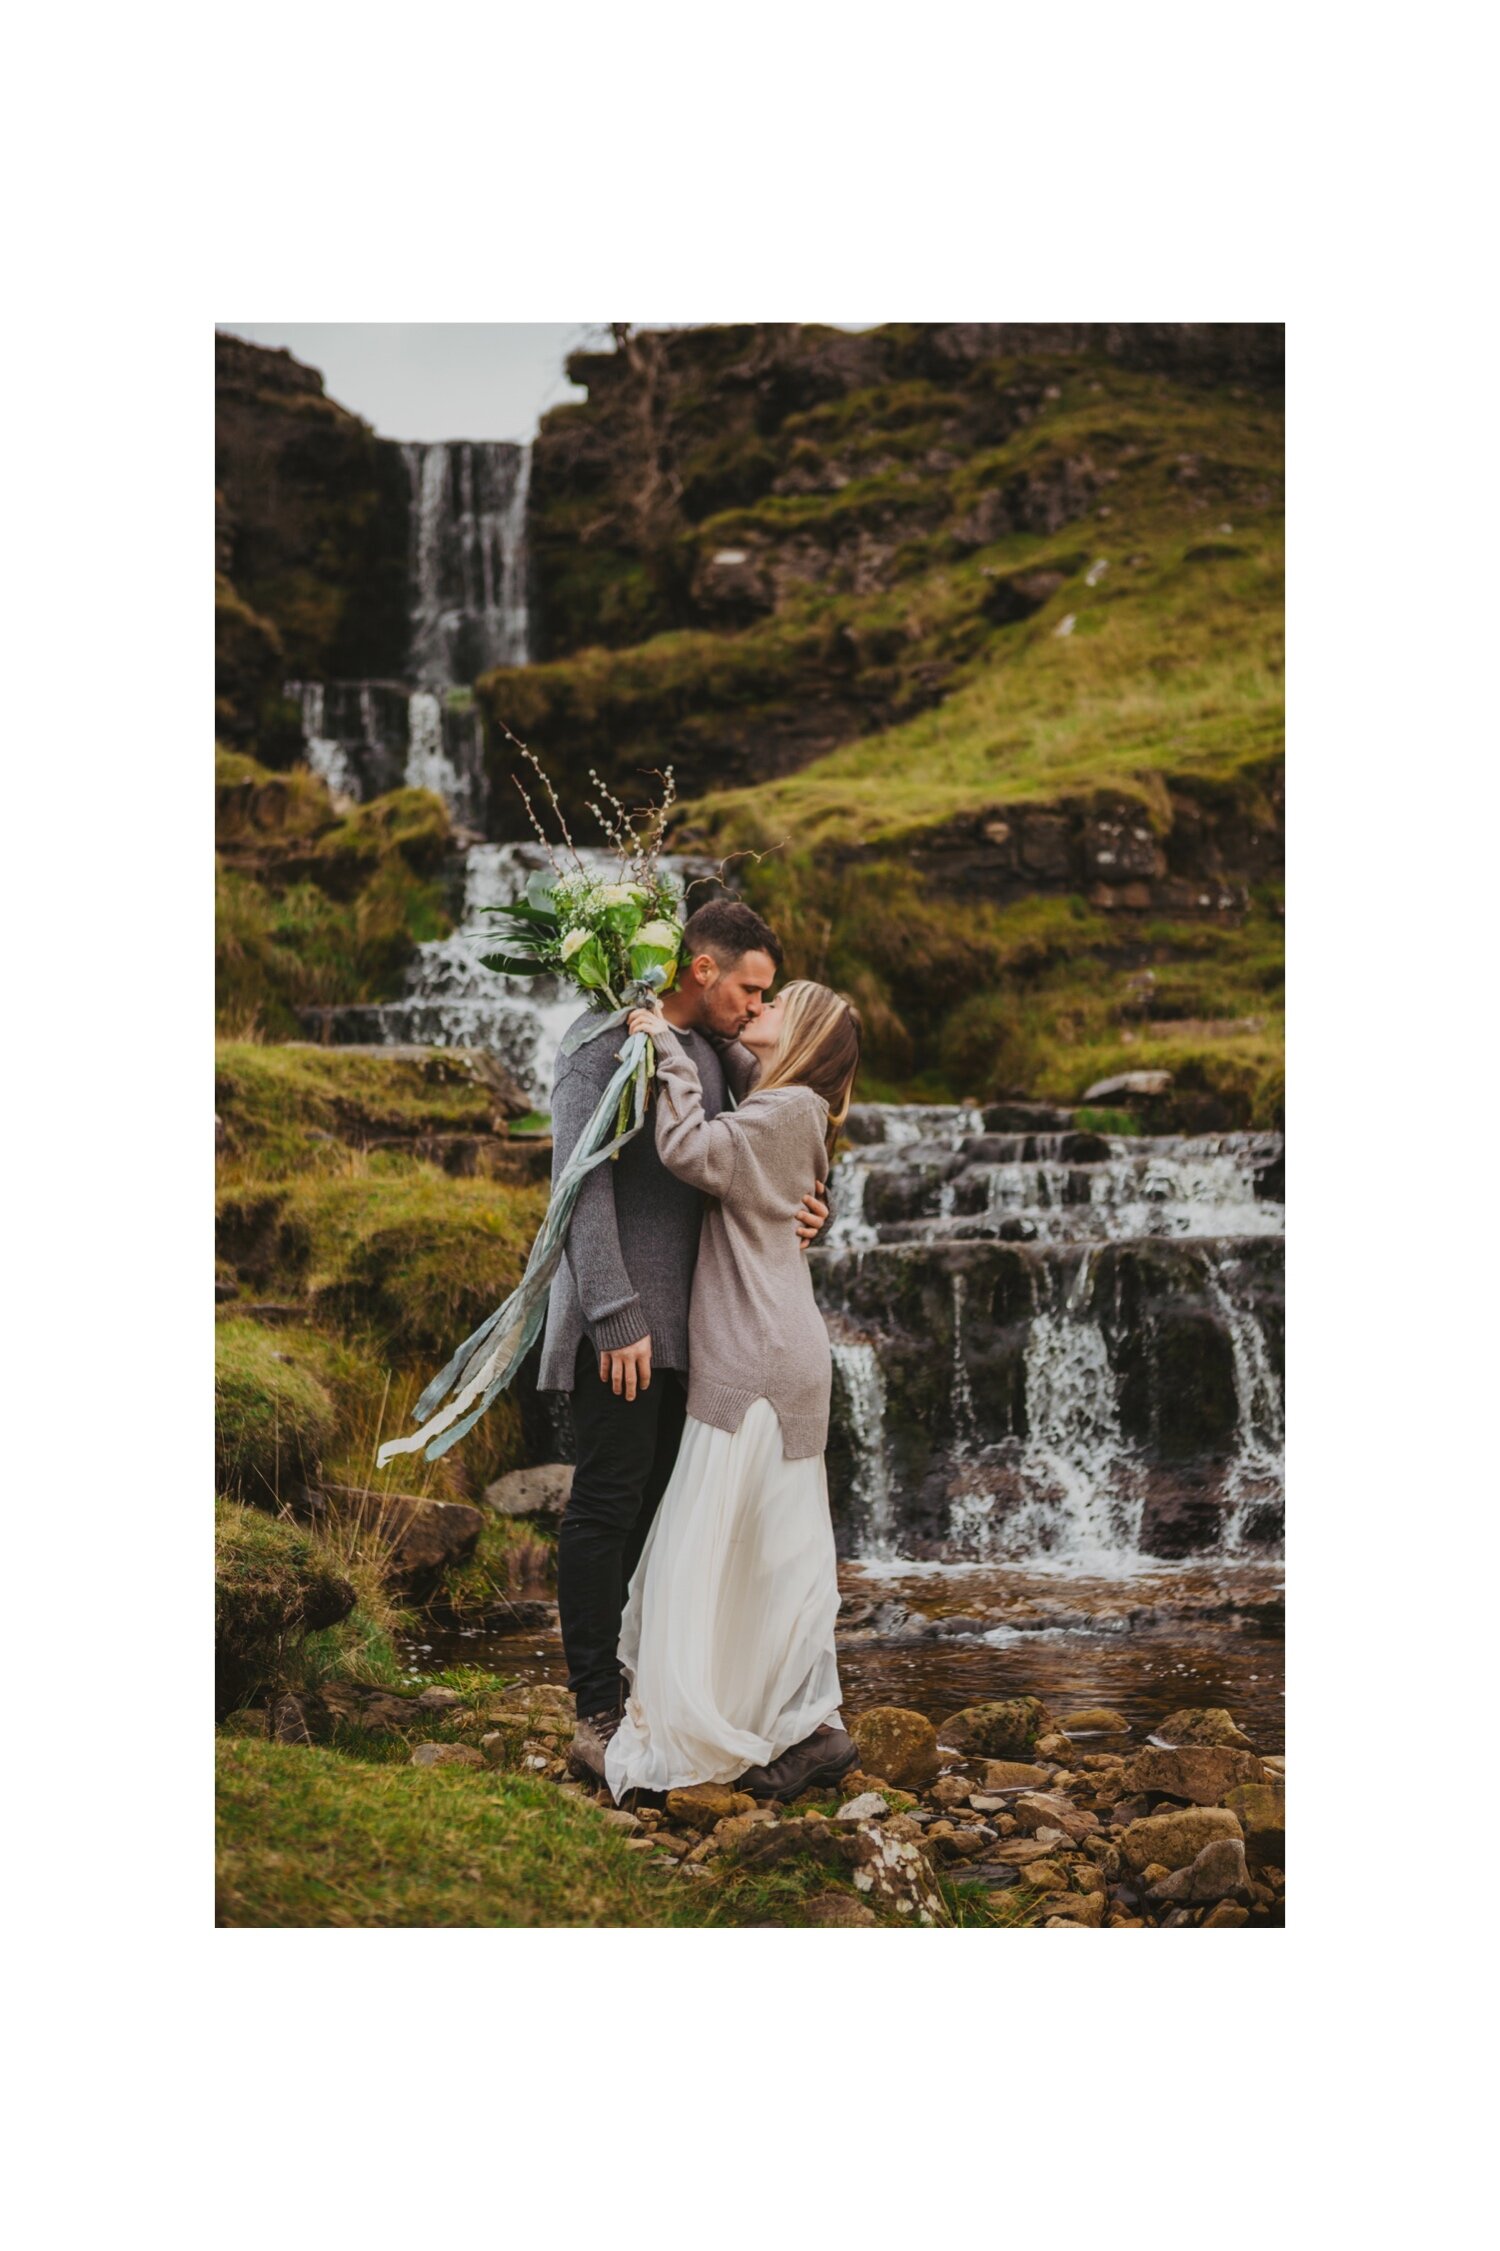 32_TWS-105__grey_dramatic_landscape_alternative_elope_alt_rock_blue_waterfall_winter_flowers_offbeat_dales_waterfalls_autumn_elopement_photography_ribbons_moody_bride_silver_wedding_yorkshire_rainy_cloudy_cosy_weather_photographer_florals_groom.jpg